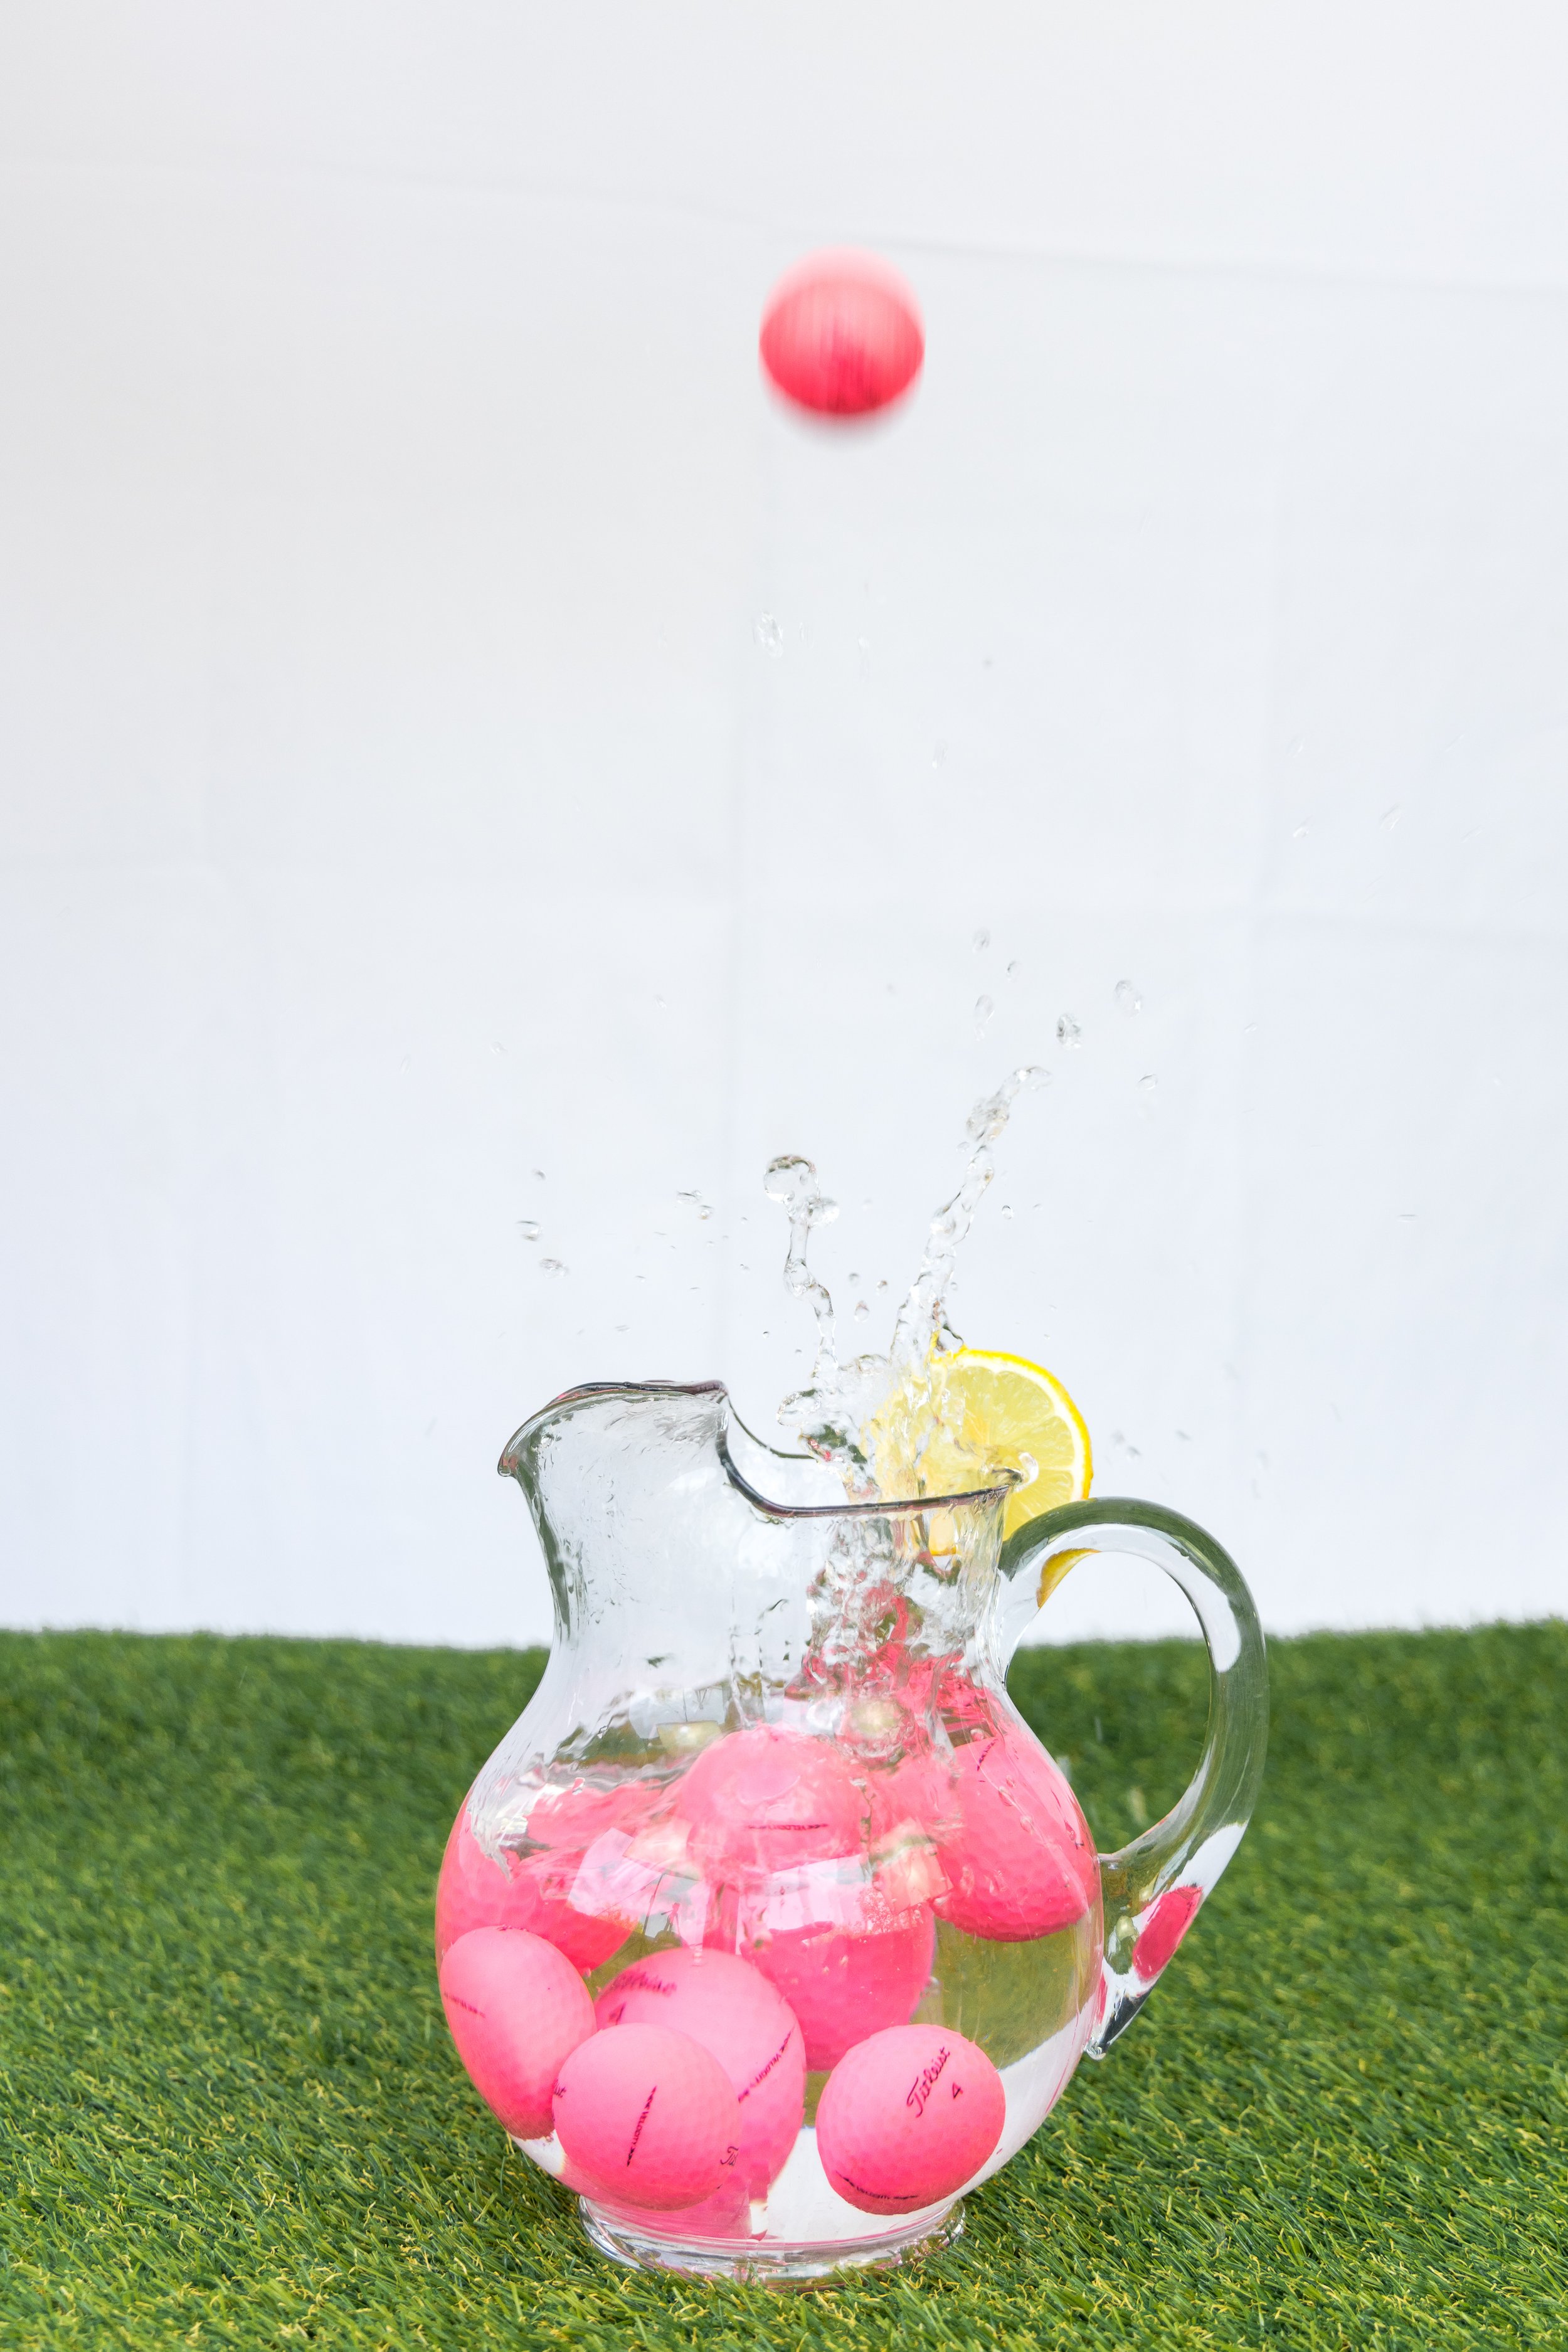  Colorful golf balls splashing into pitcher of water, 